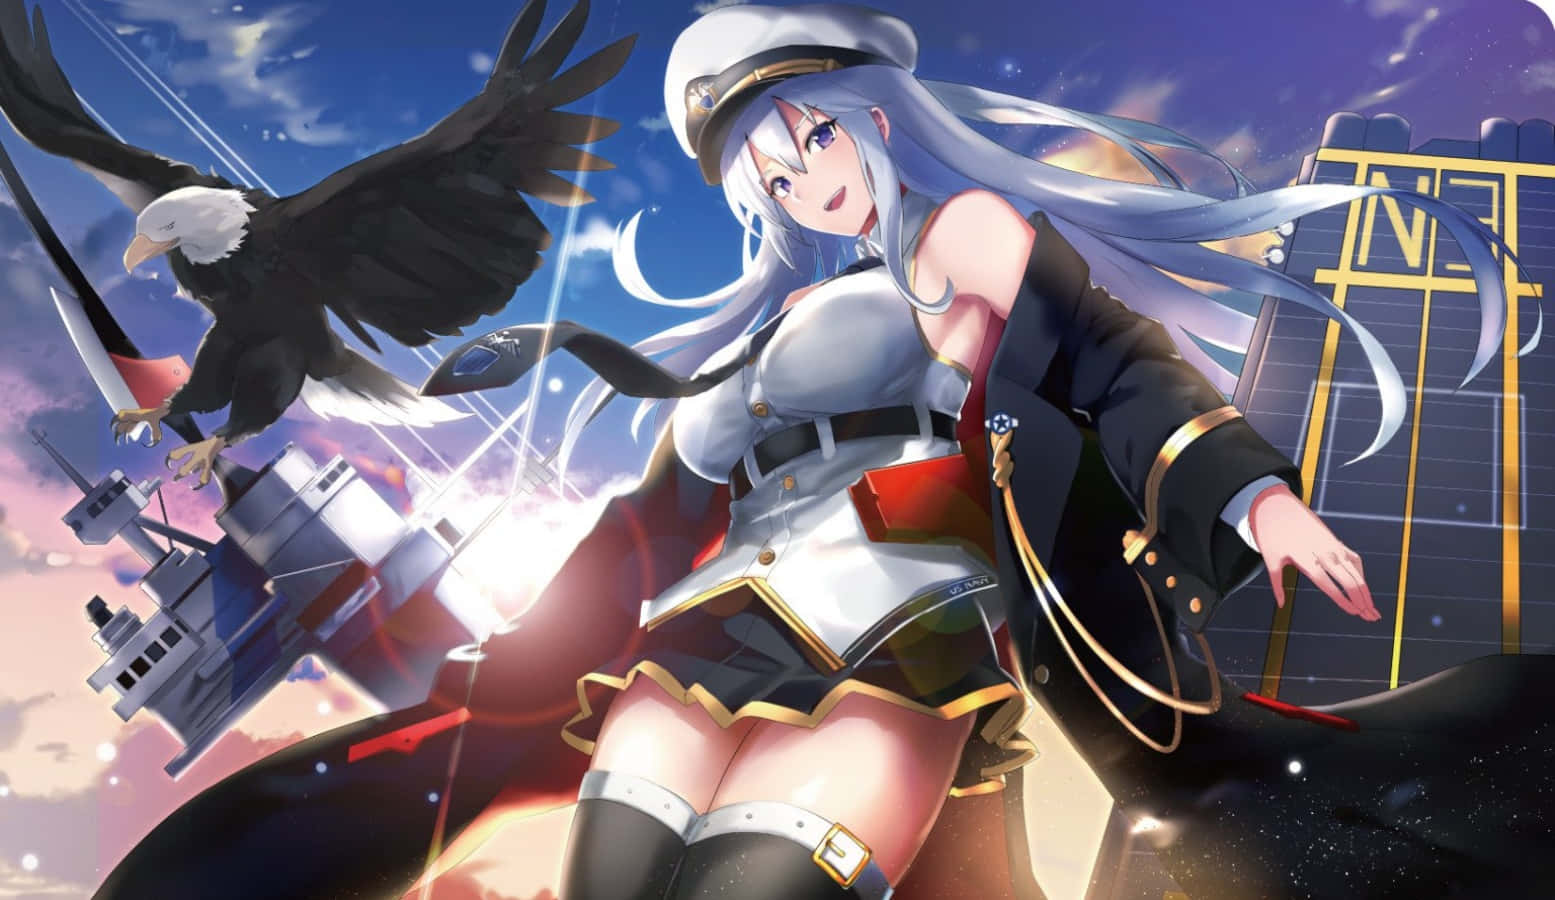 Enterprise and Belfast's Key Visual for the Upcoming Fall Anime “Azur Lane”  Released! - Erzat